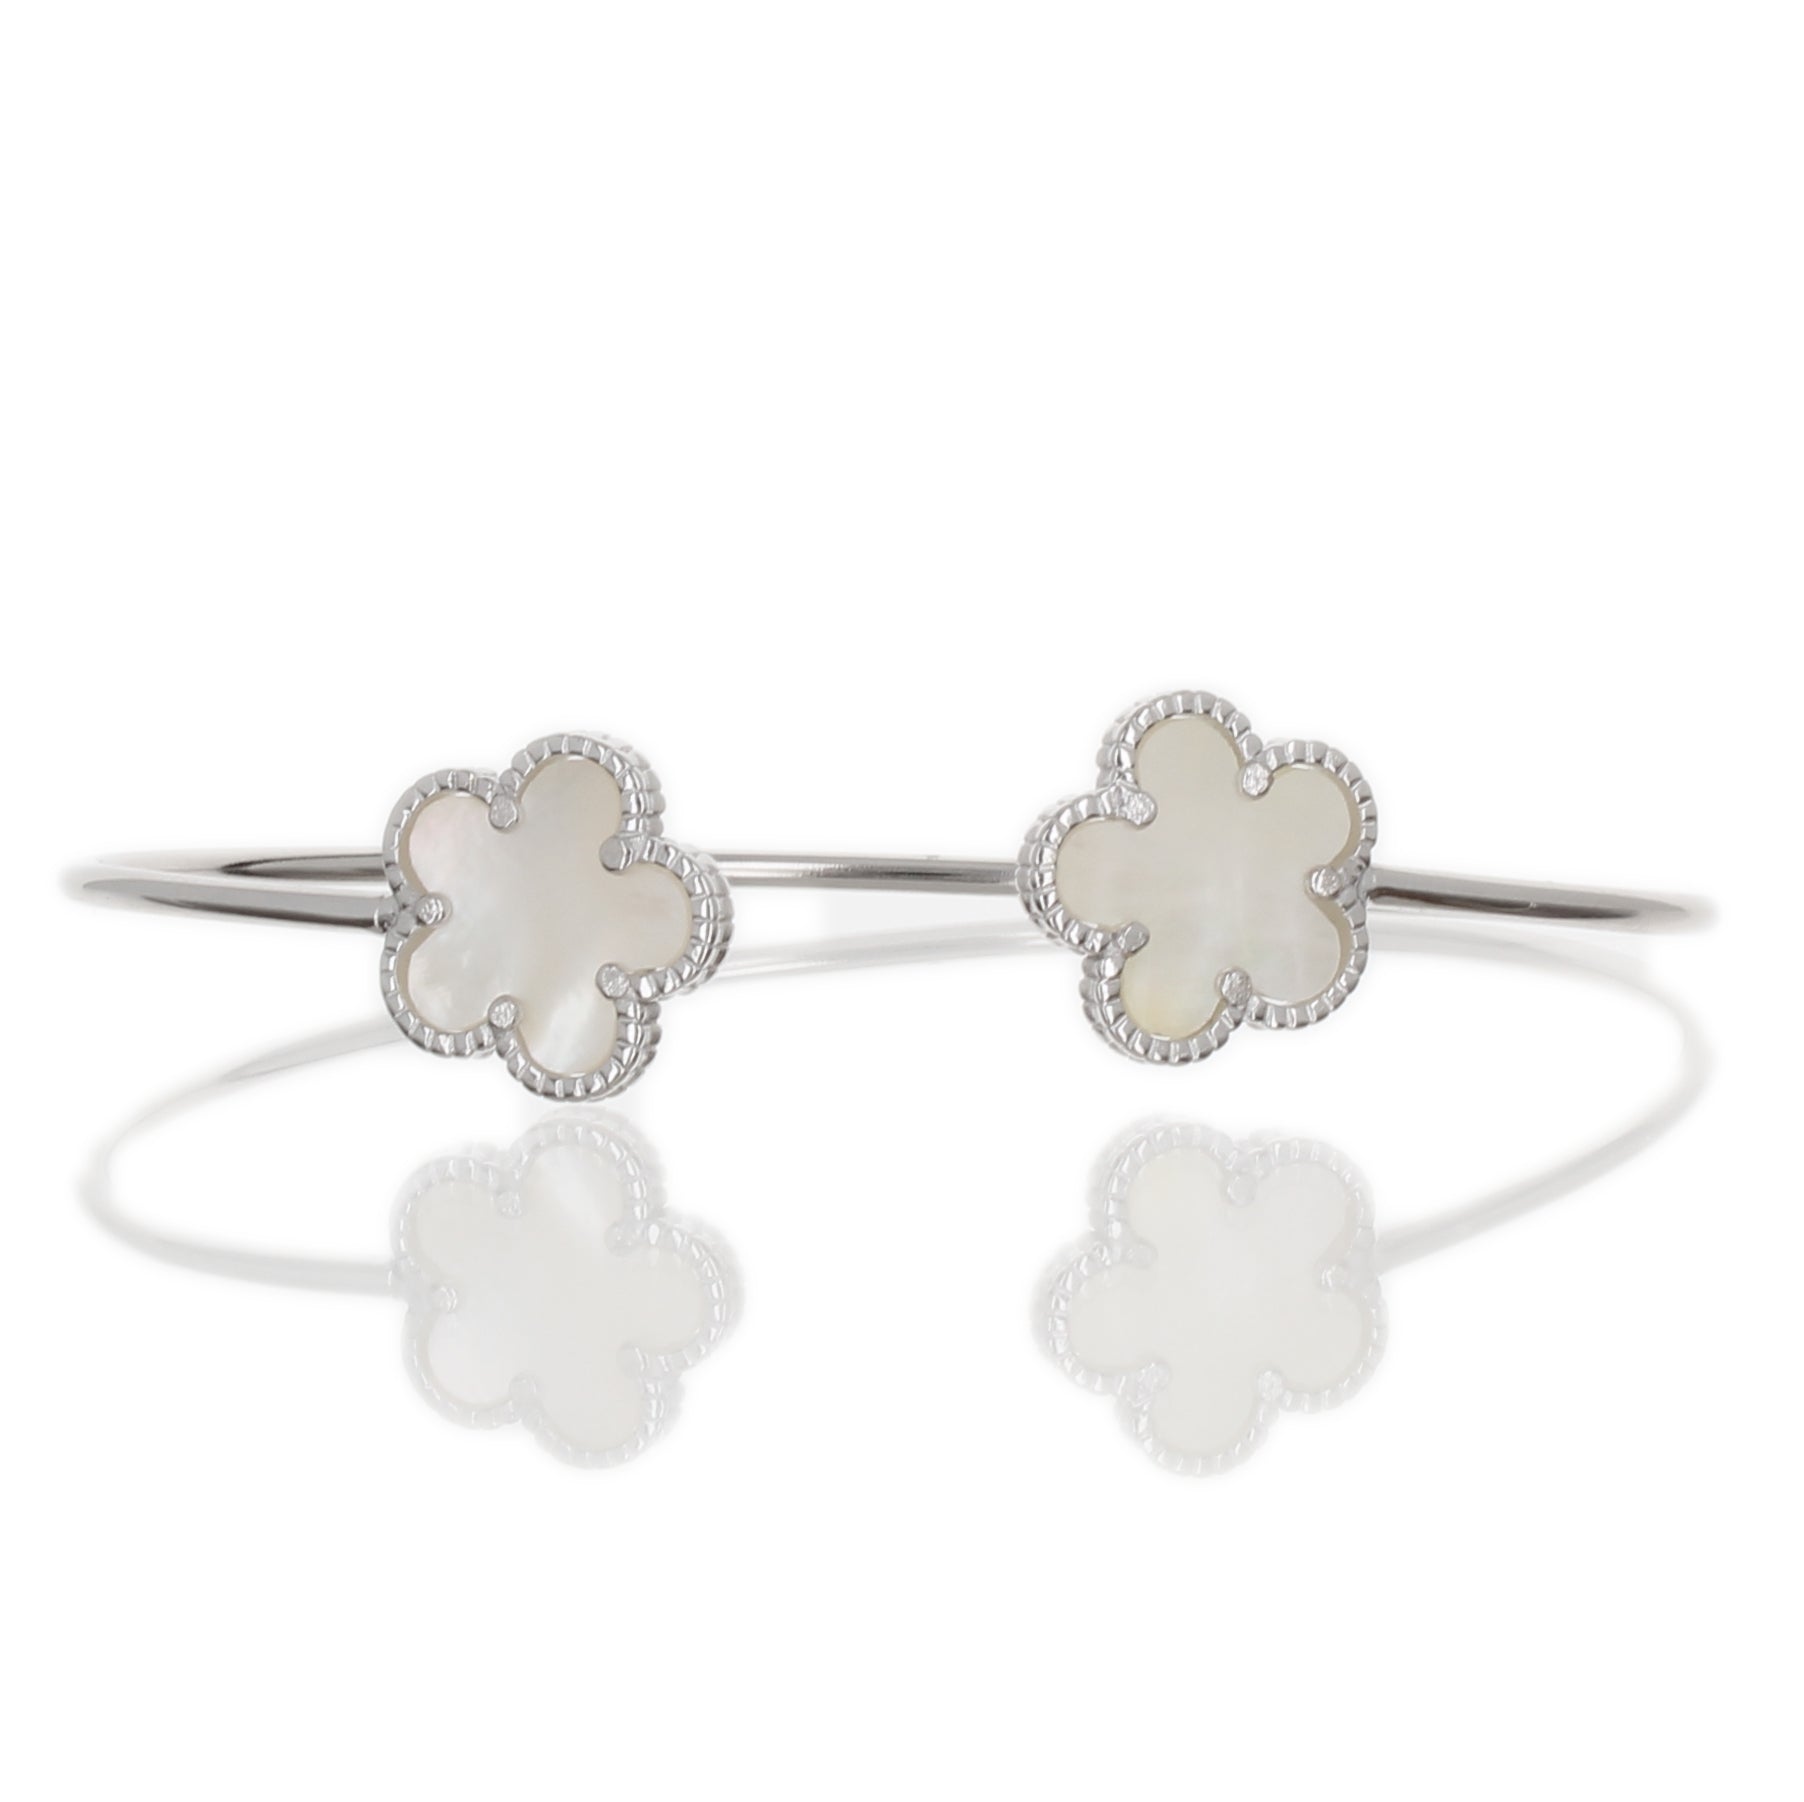 MOTHER OF PEARL DOUBLE FLOWER BANGLE